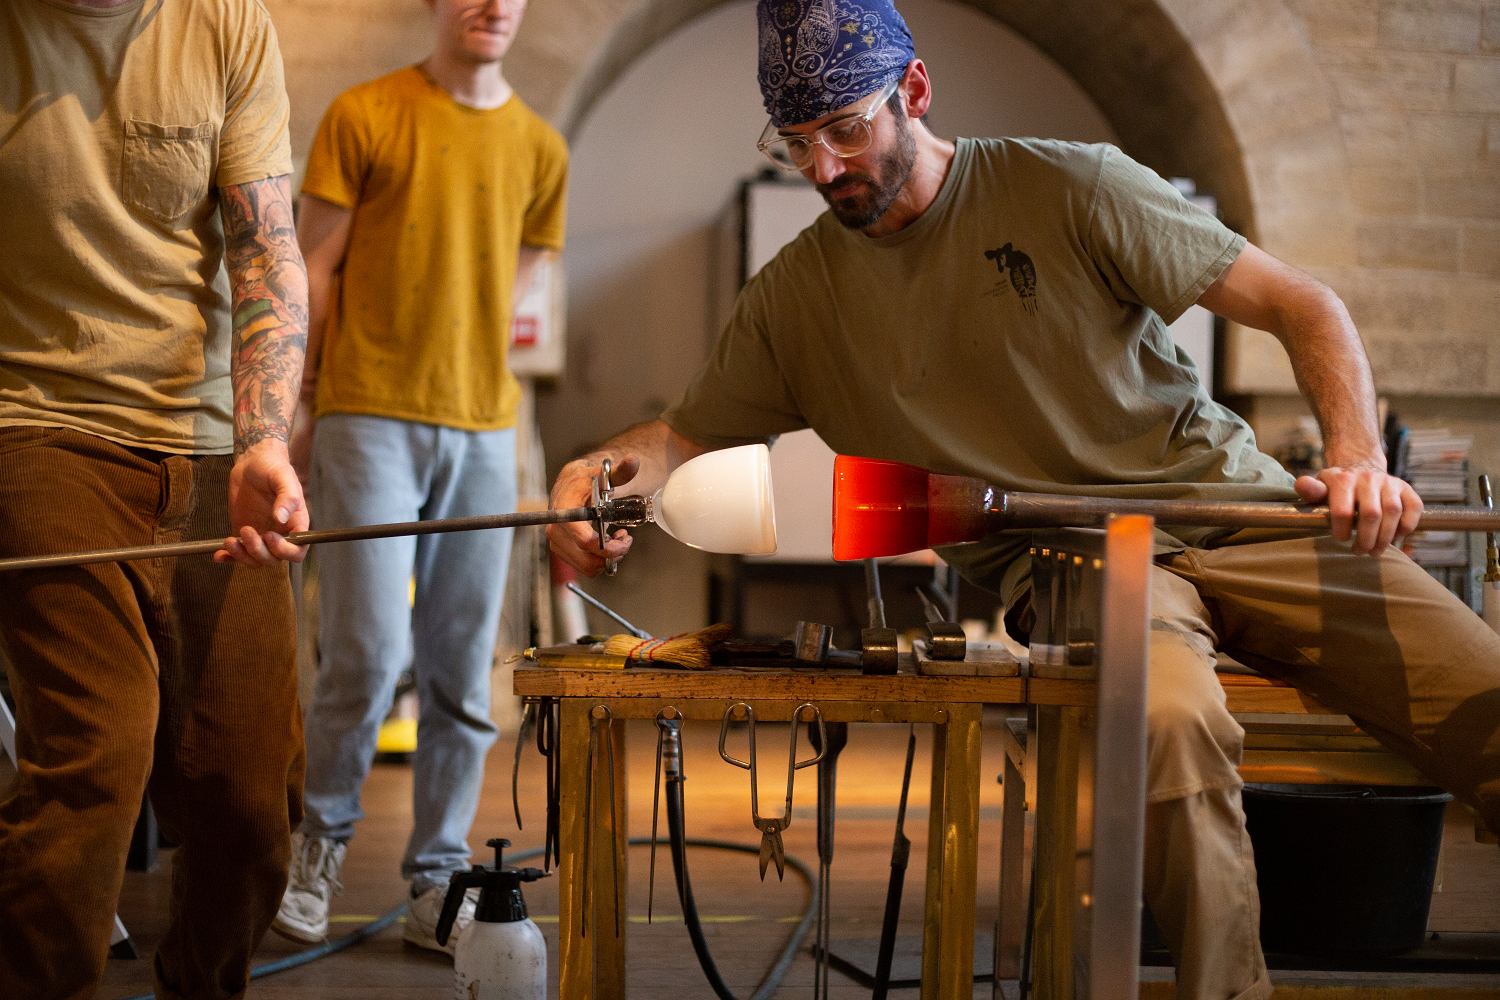 Glassblower, the millennial and contemporary breath